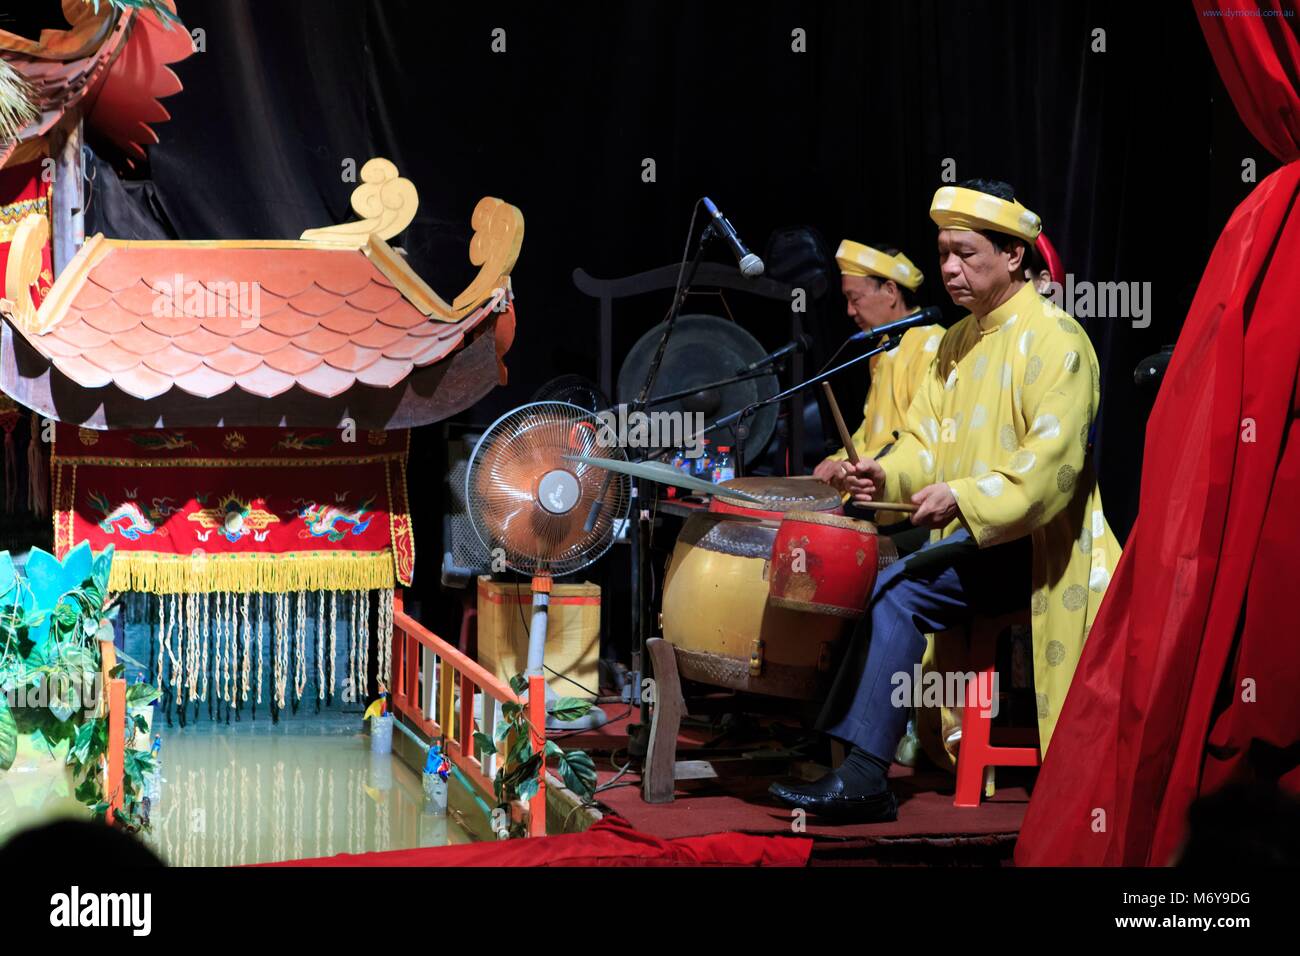 Musicians provide narration and music during a performance at the Golden Dragon Water Puppet Theatre in Ho Chi Minh City, Vietnam Stock Photo